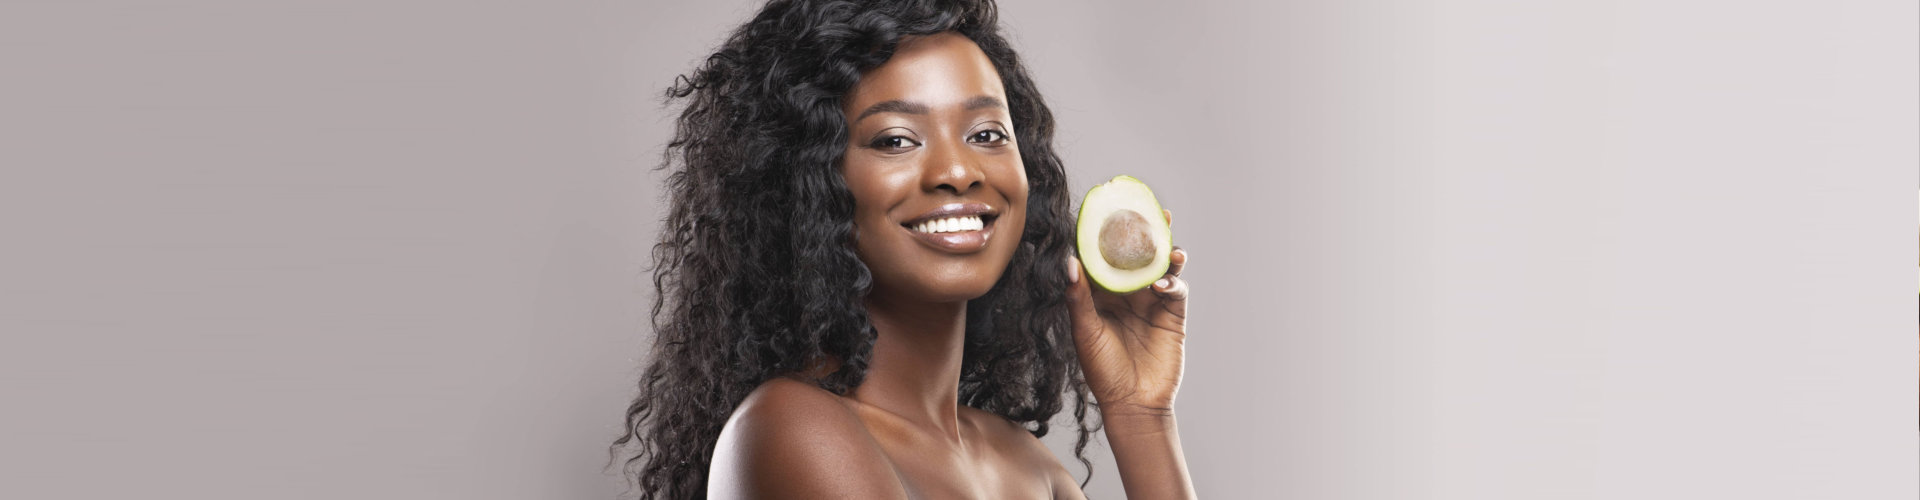 a woman smiling holding an avocado